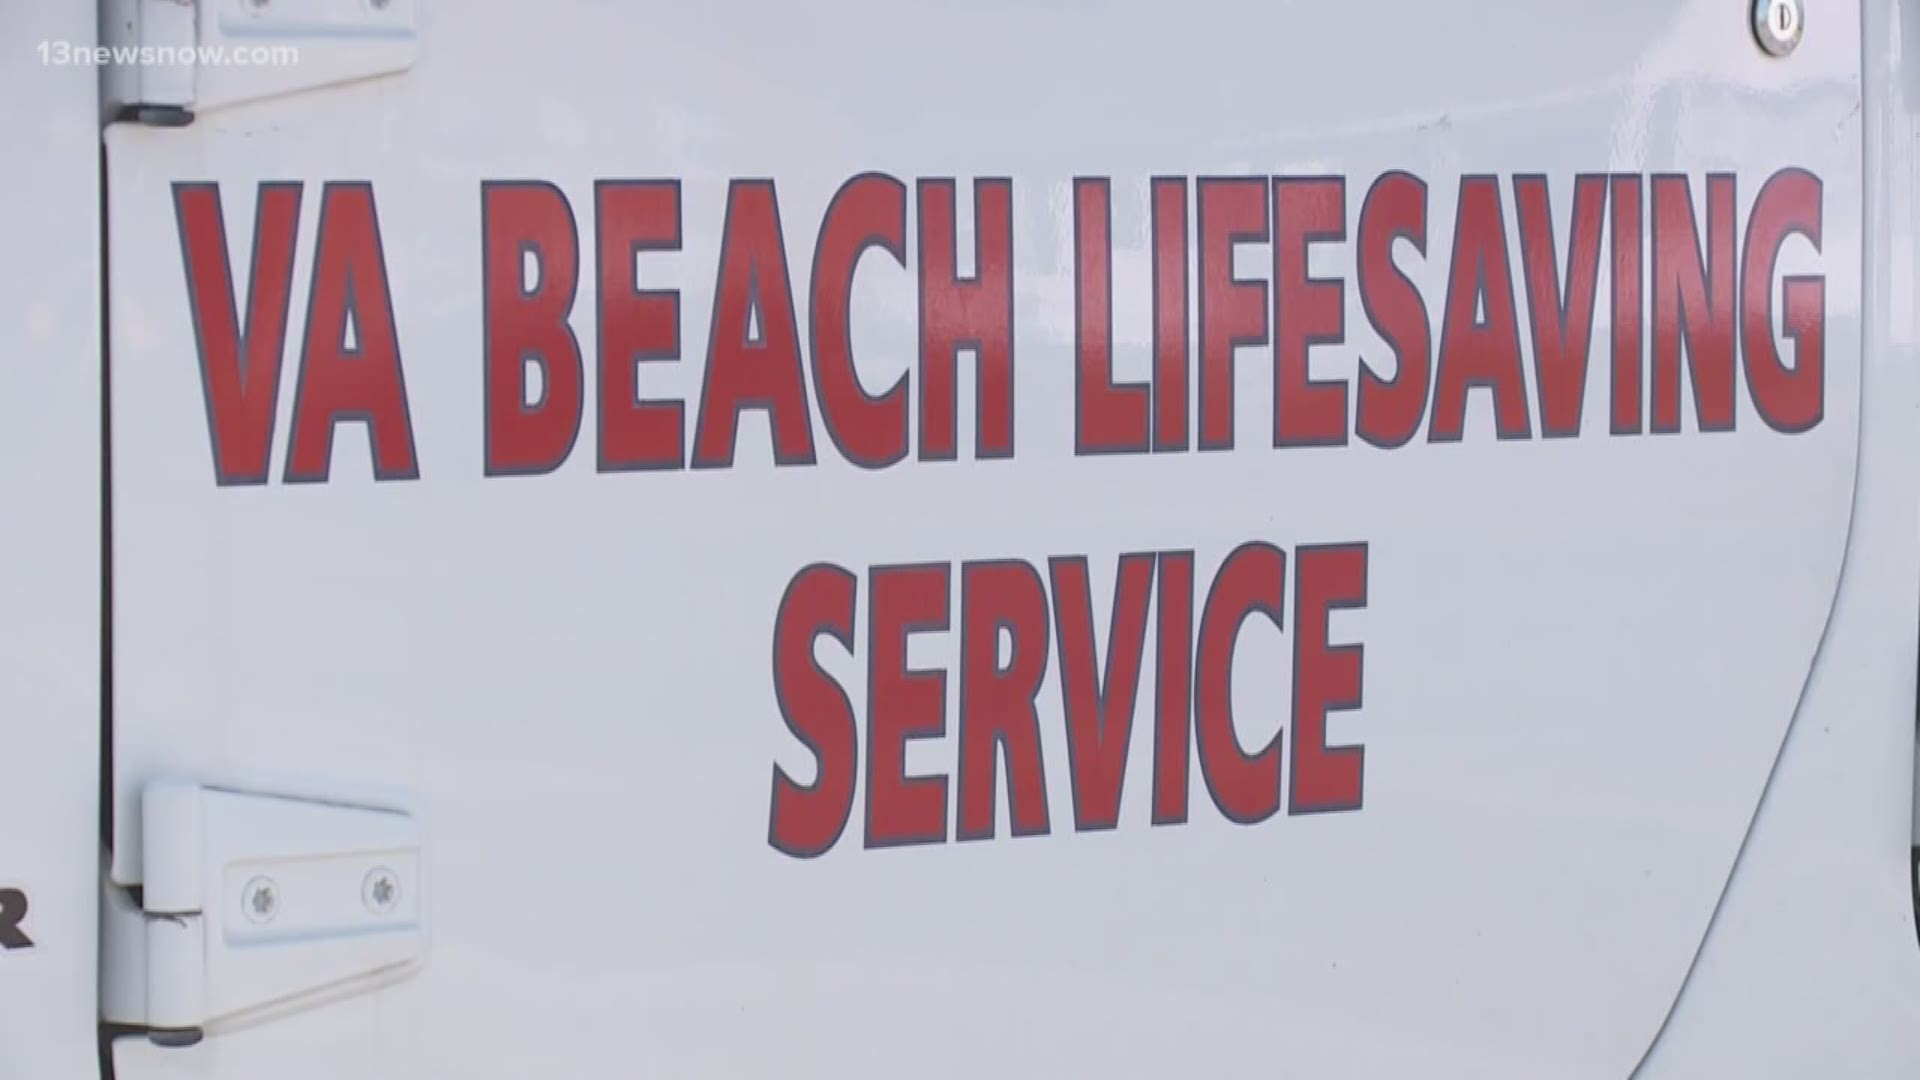 “October has been an extremely warm month. Beaches were still packed, and unfortunately, there were a number of drownings during that time after all the lifeguards were gone,” explained Chief Tom Gill.